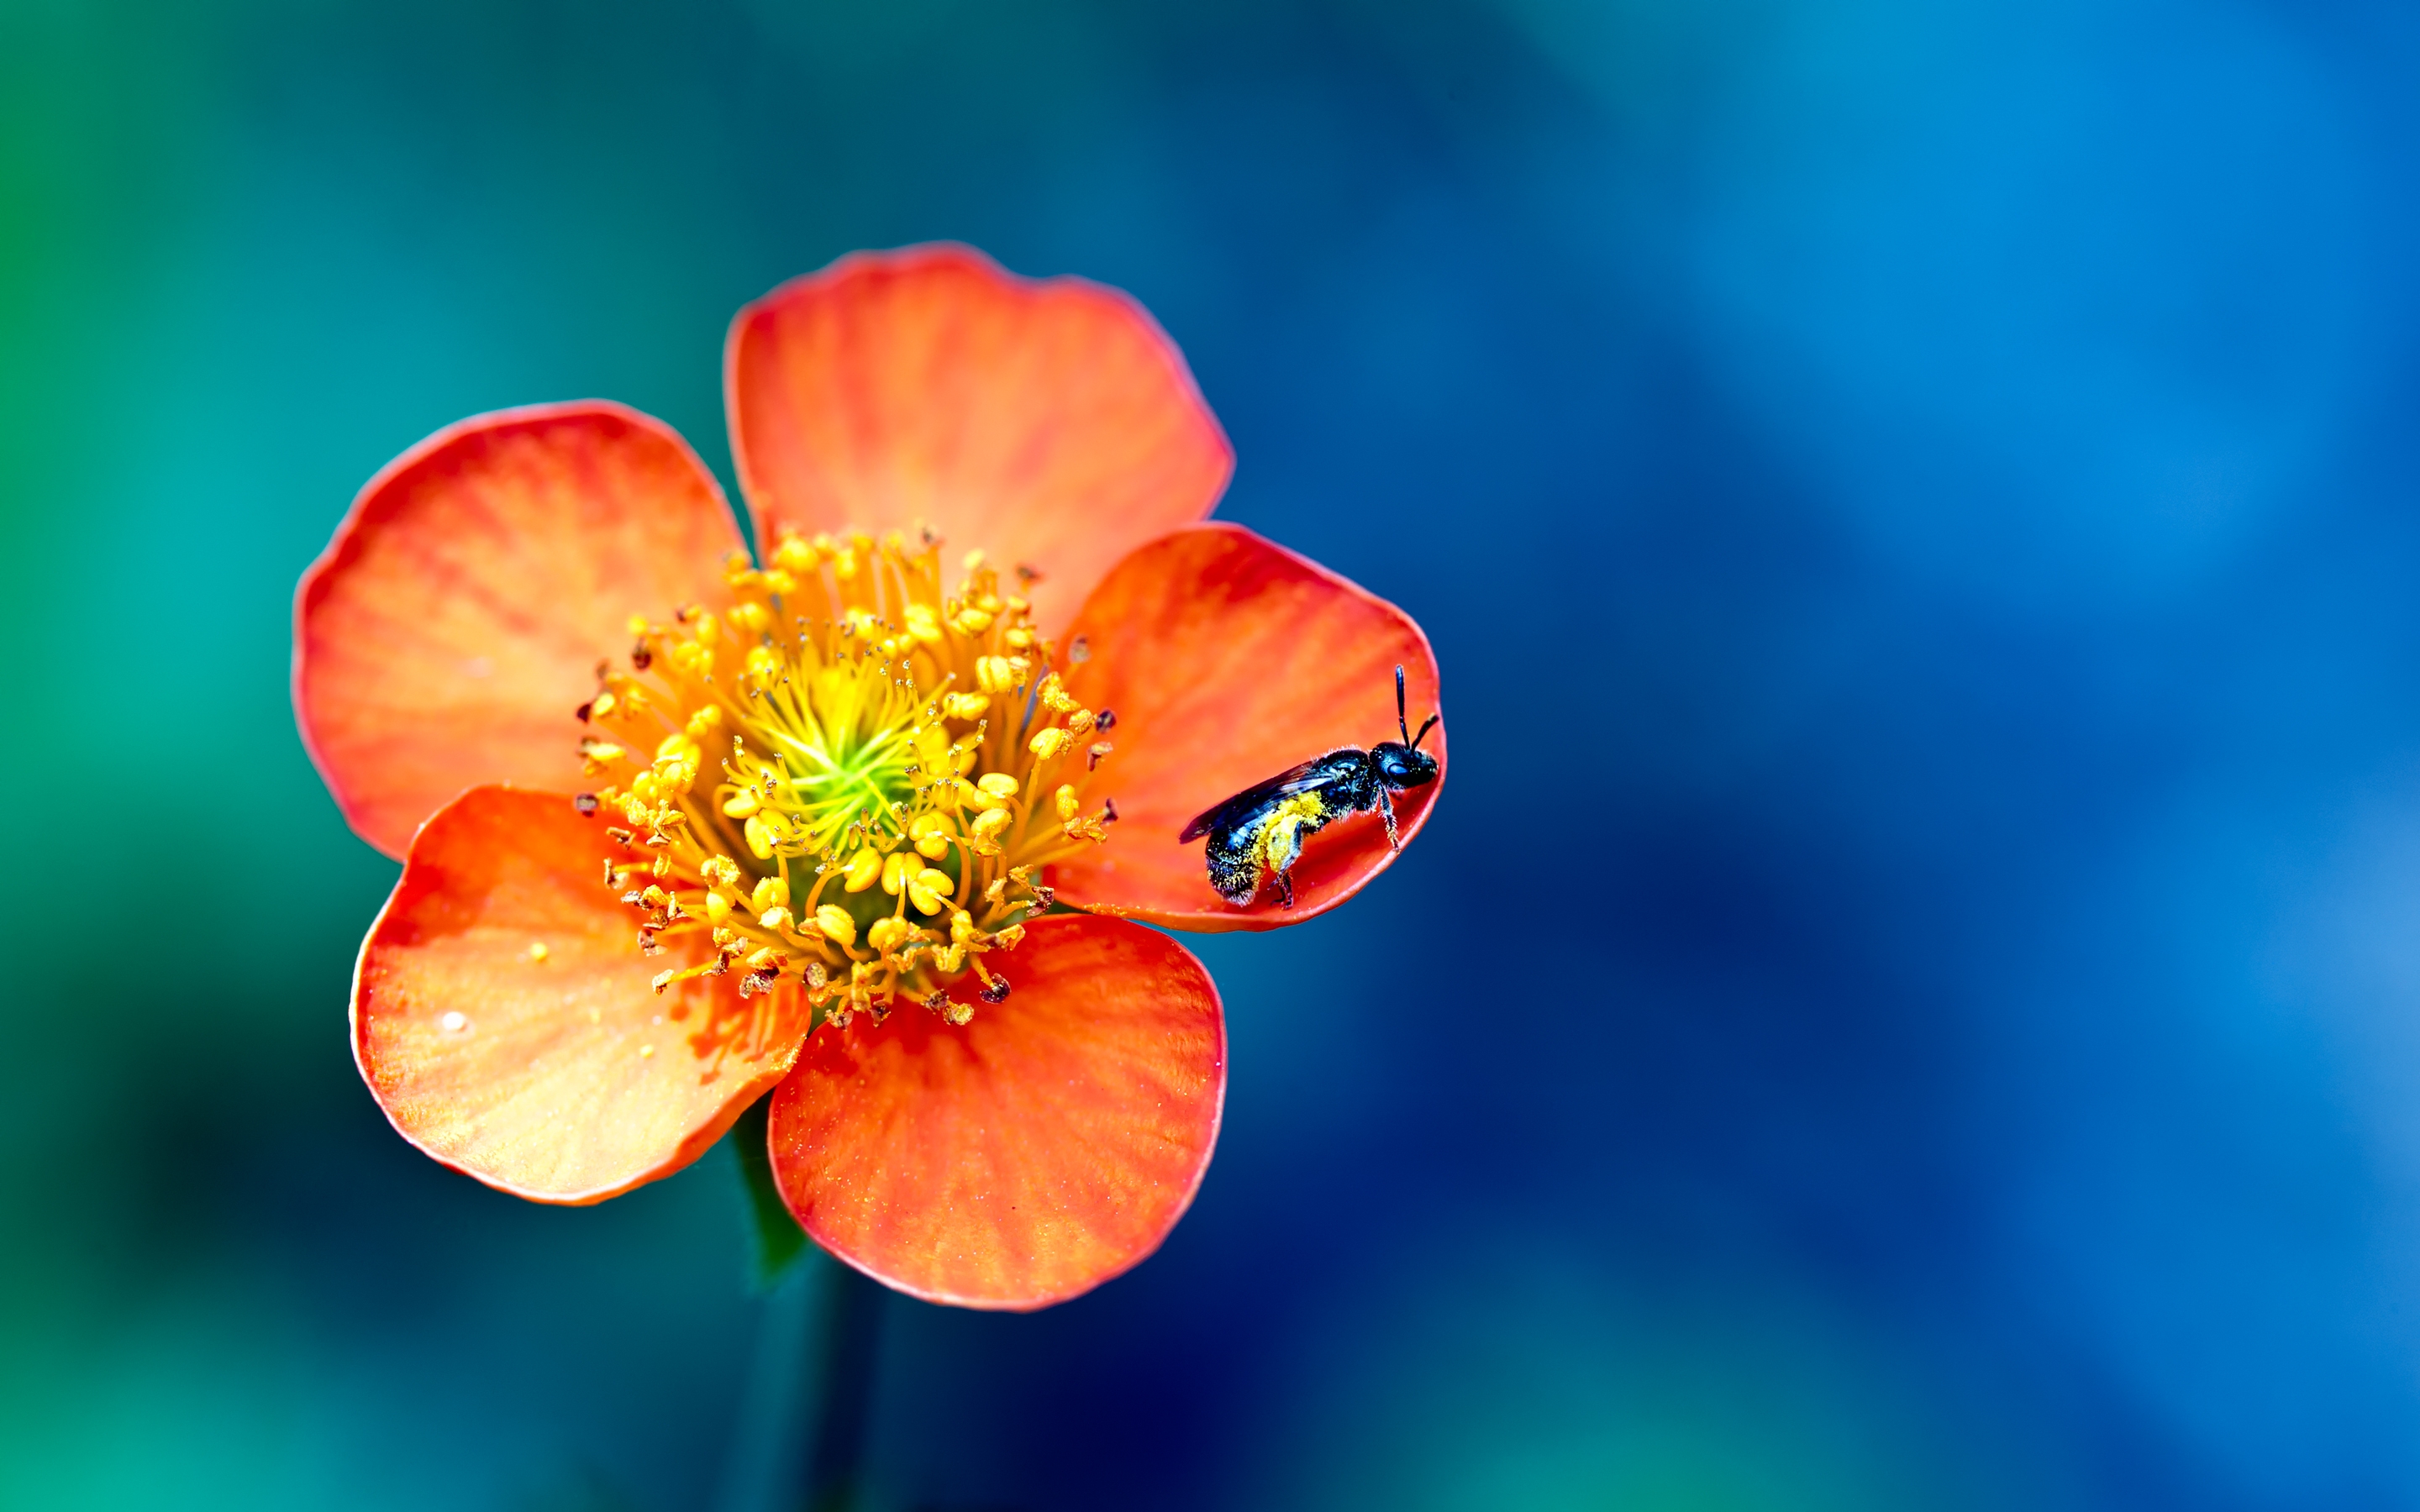 Pollen 4K wallpaper for your desktop or mobile screen free and easy to download